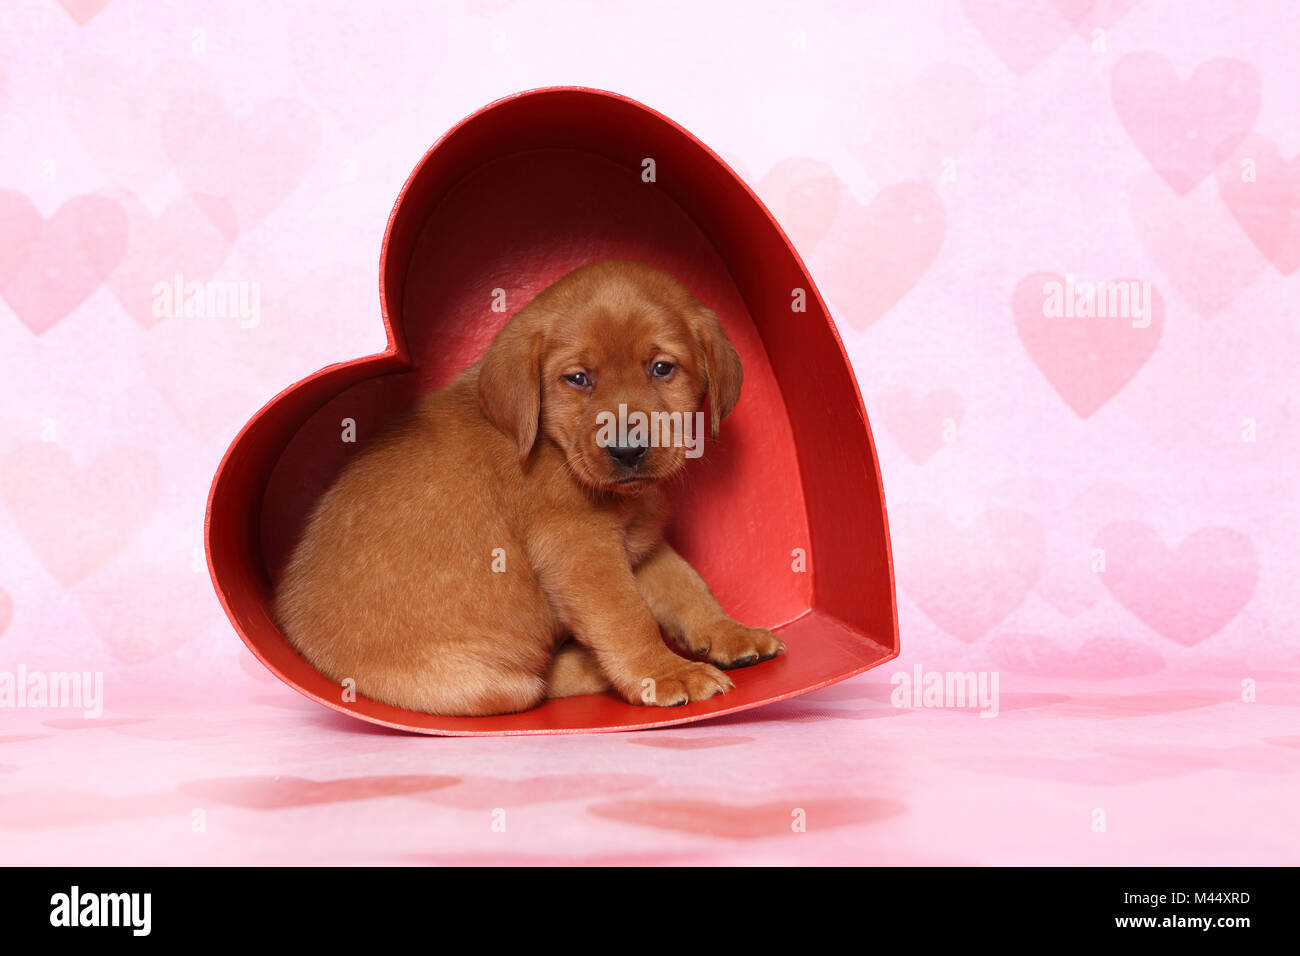 Labrador Retriever. Puppy (6 weeks old) sitting in a red heart made of cardboard. Studio picture seen against a pink background with heart print. Germany Stock Photo